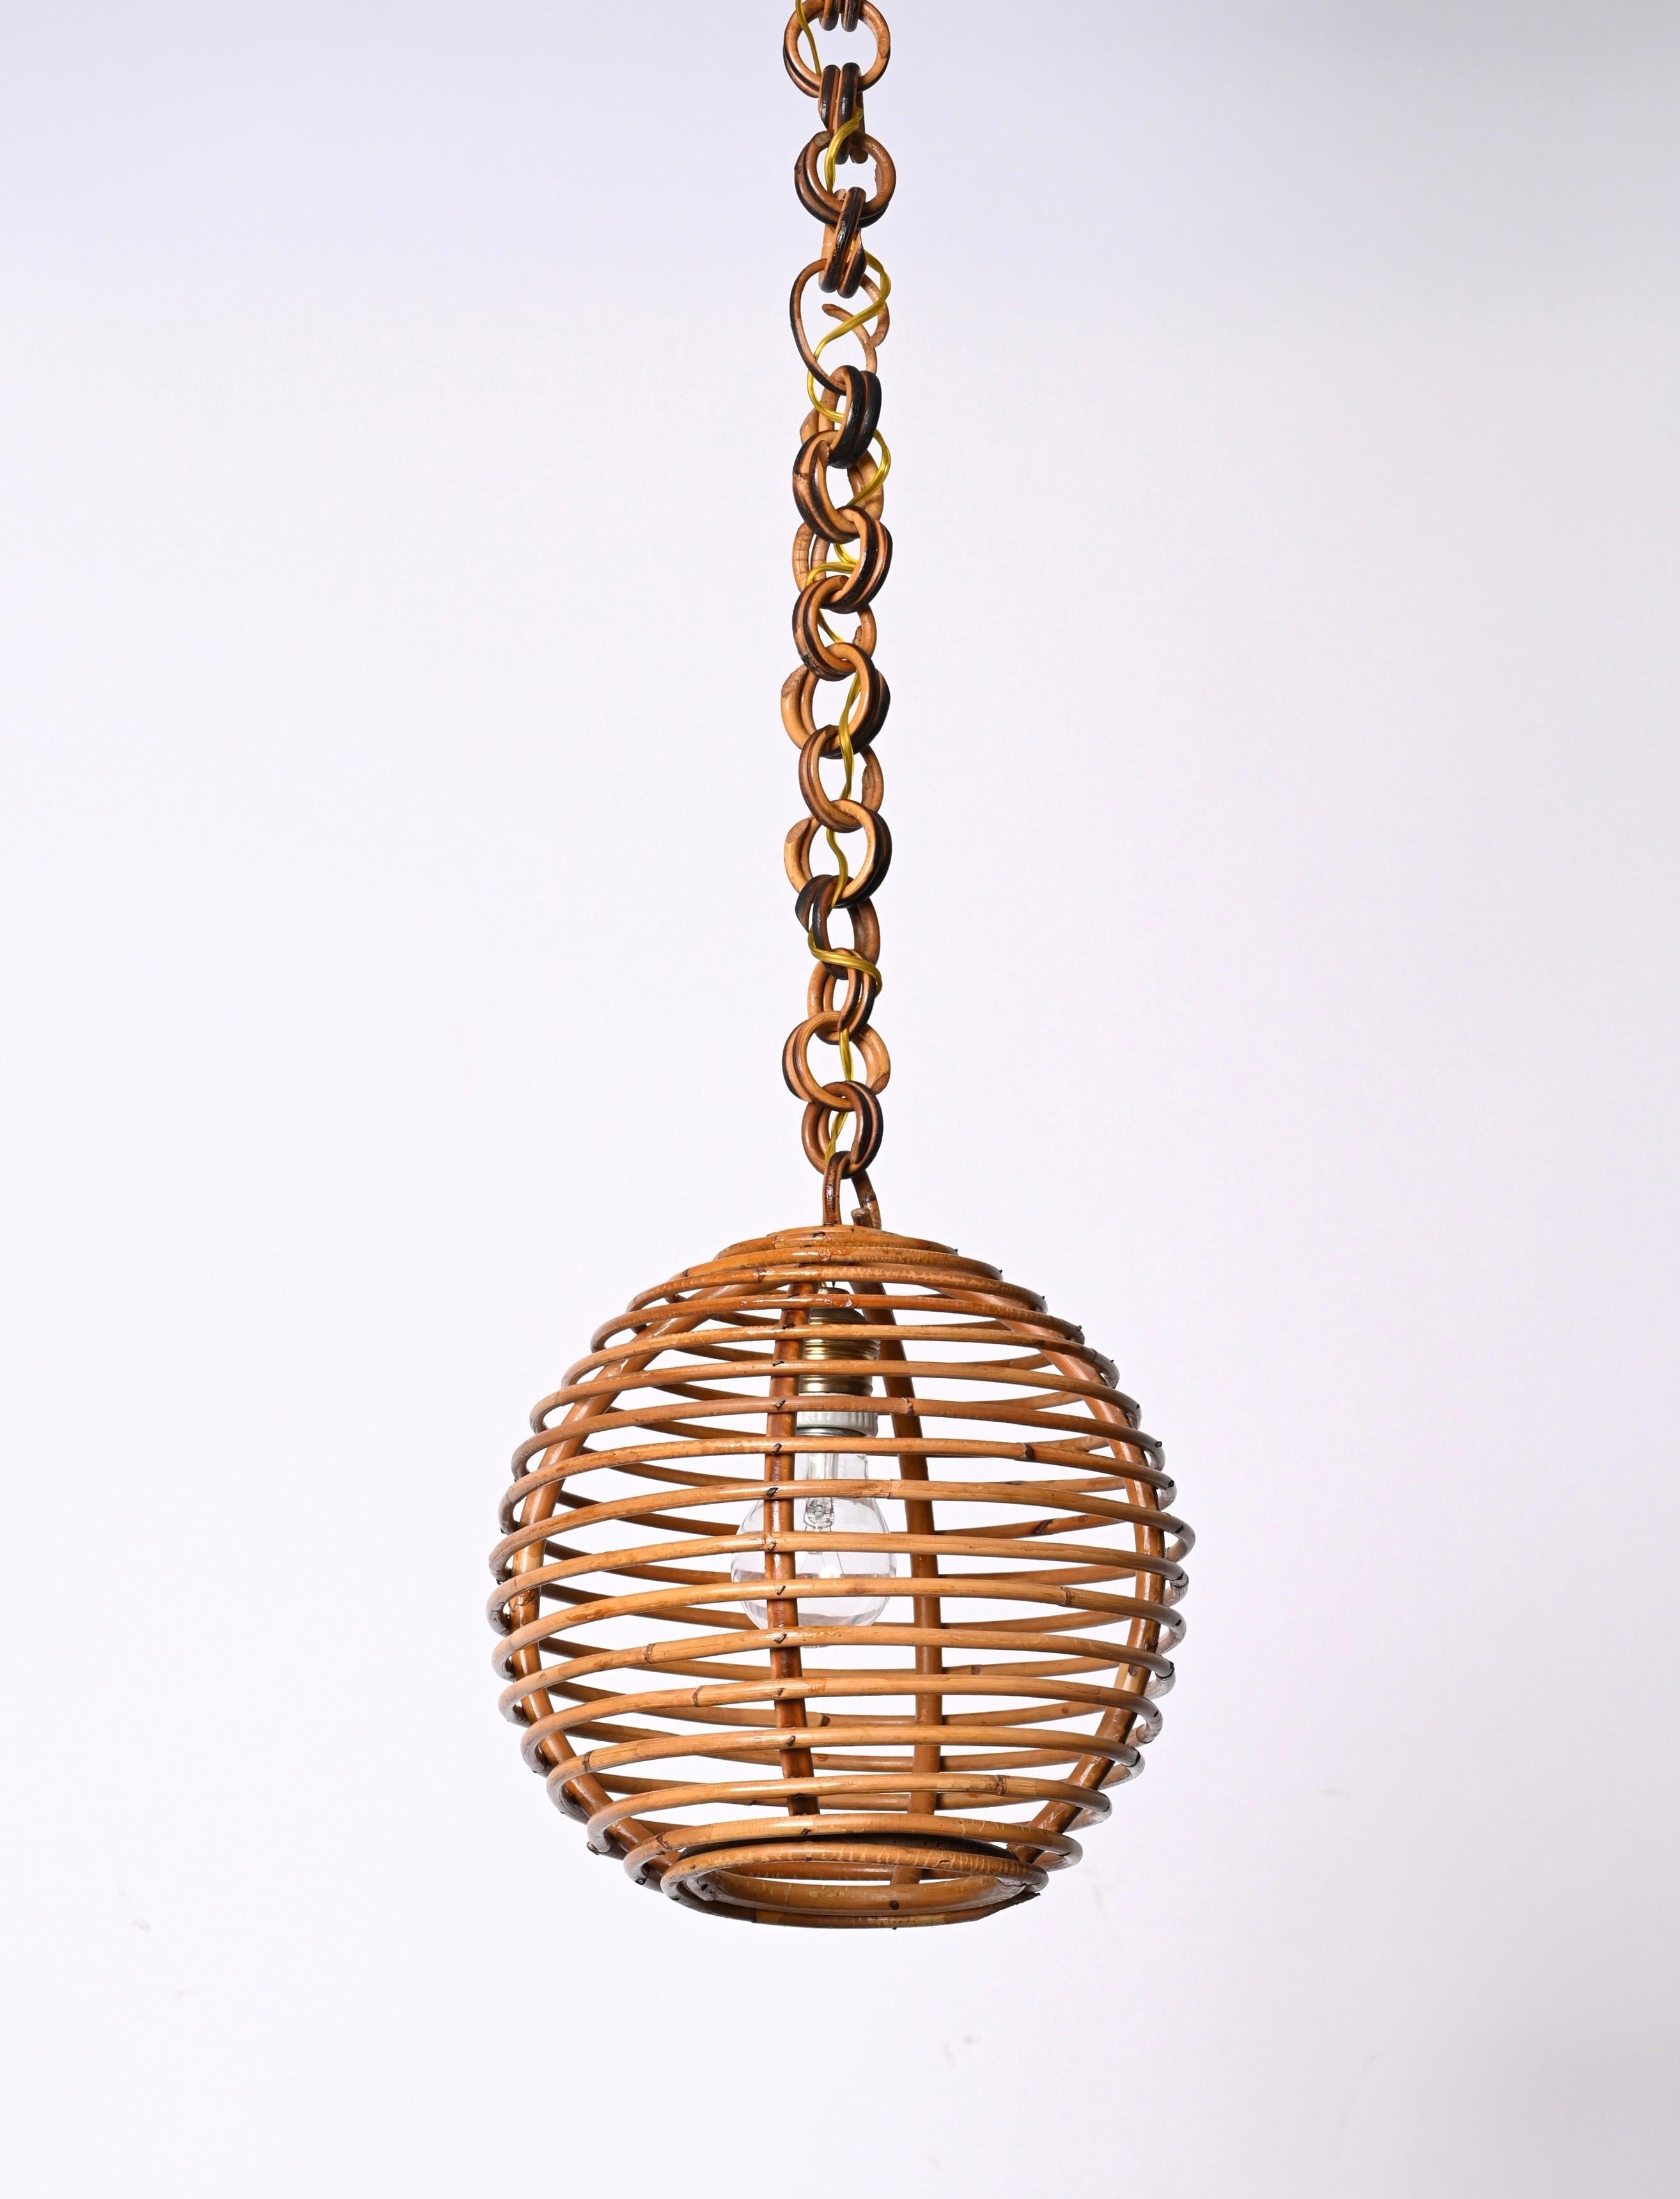 Midcentury French Riviera Bambo and Rattan Spherical Italian Chandelier, 1960s For Sale 13